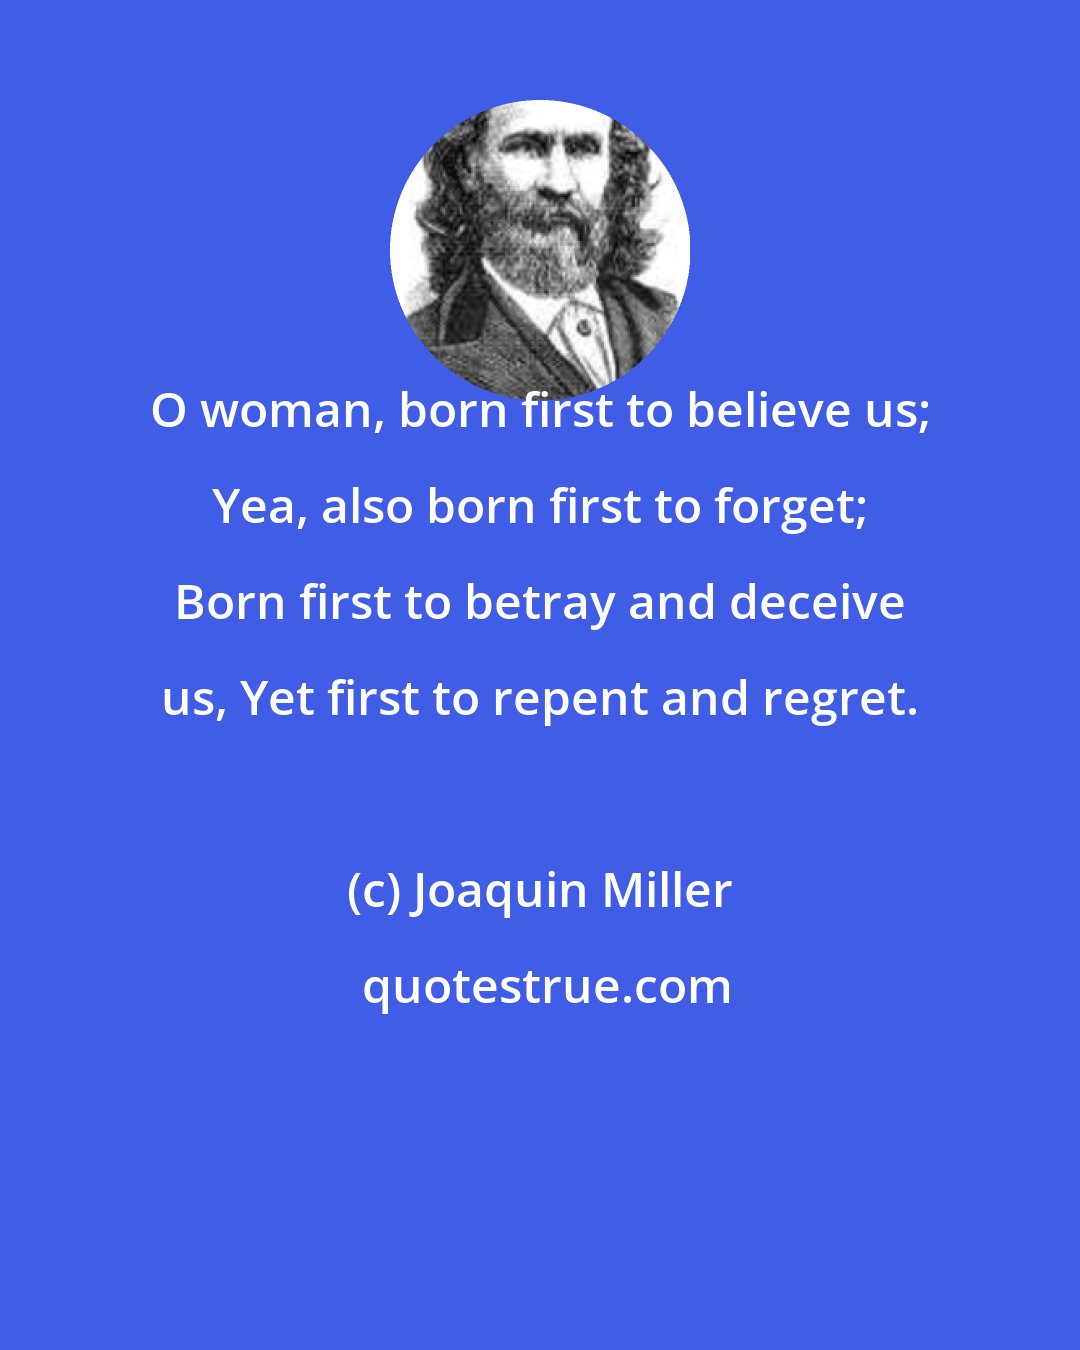 Joaquin Miller: O woman, born first to believe us; Yea, also born first to forget; Born first to betray and deceive us, Yet first to repent and regret.